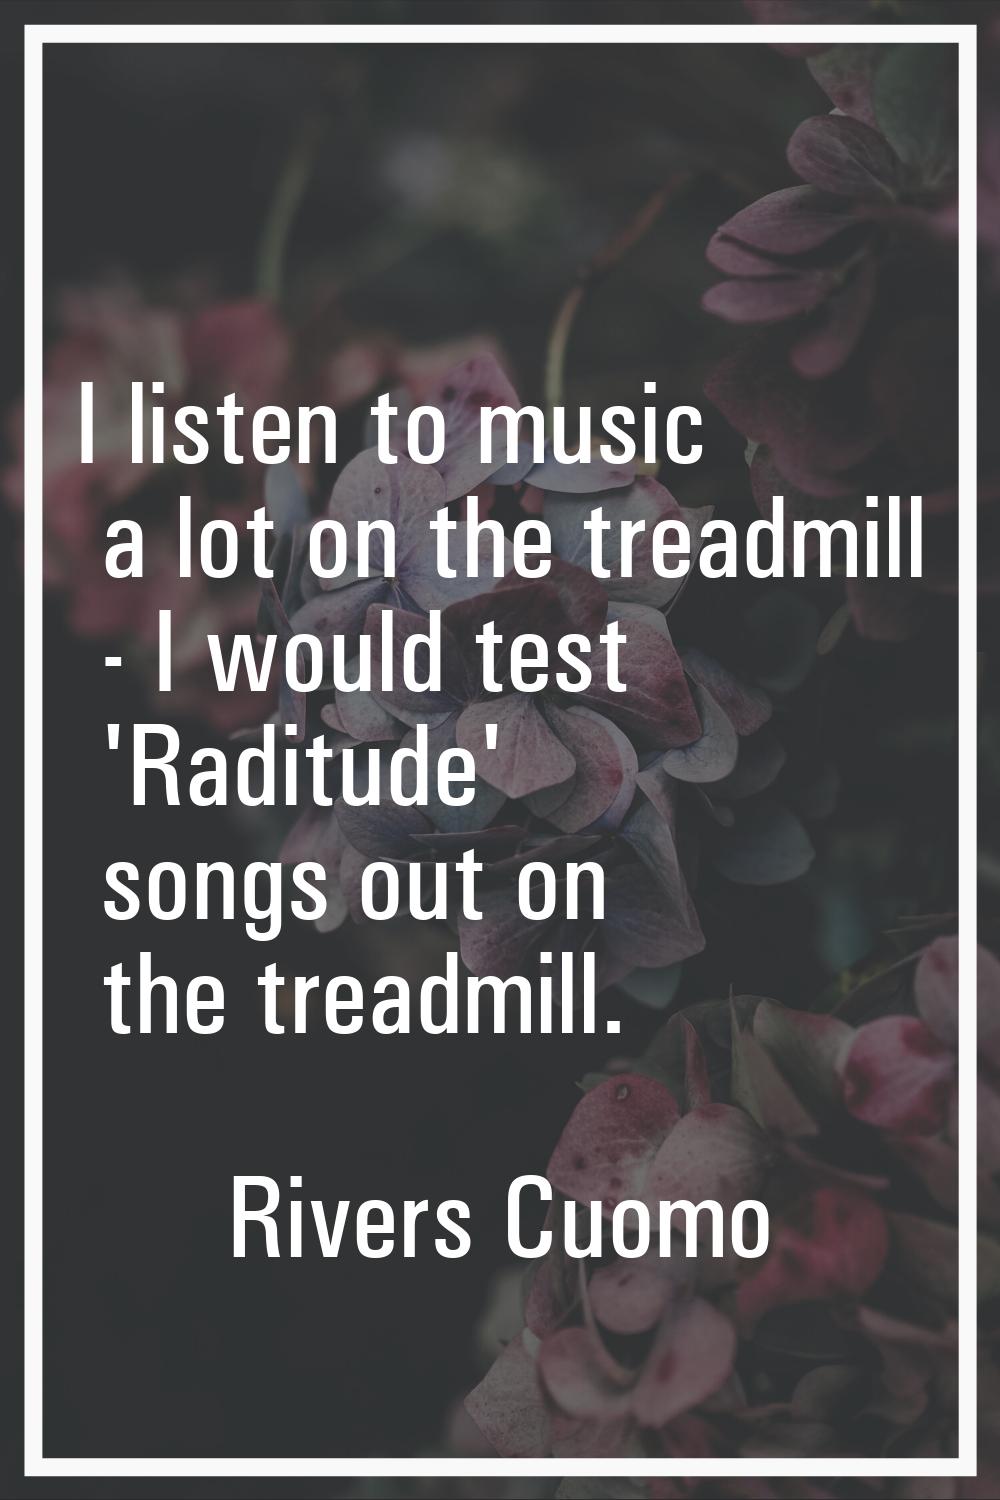 I listen to music a lot on the treadmill - I would test 'Raditude' songs out on the treadmill.